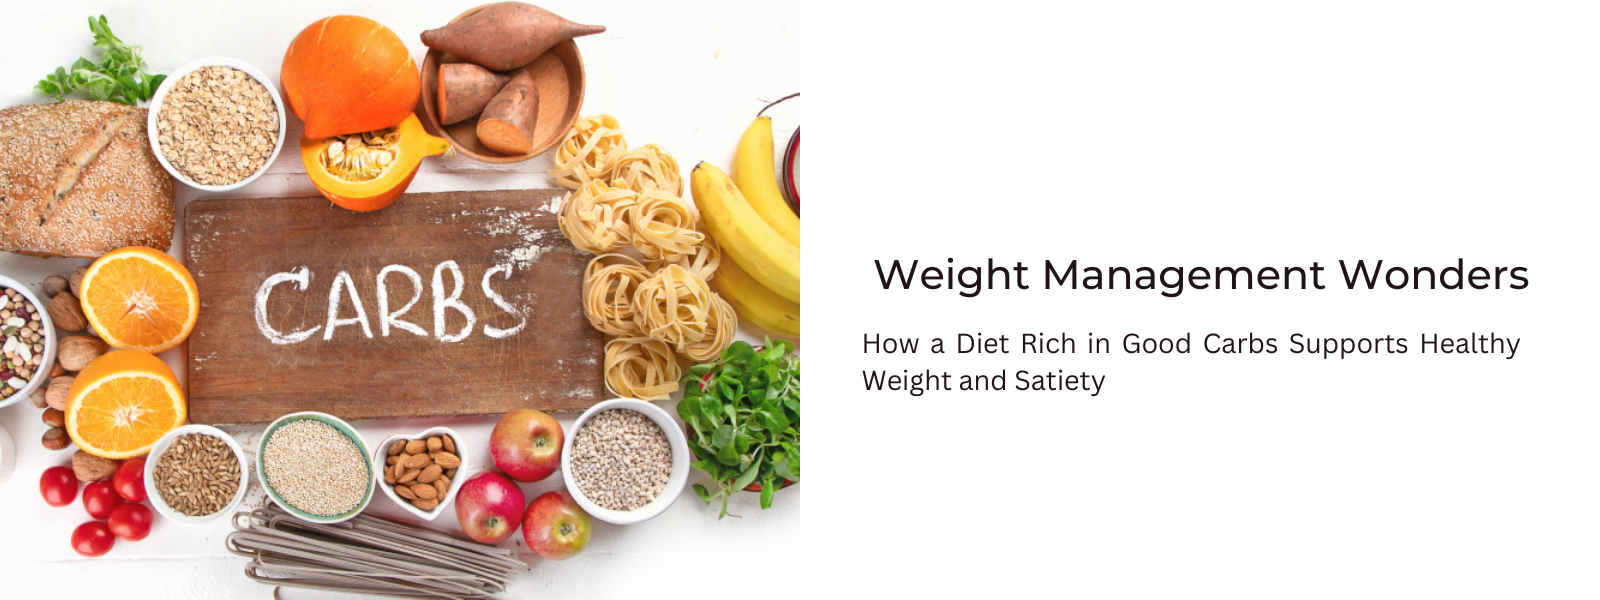 Weight Management Wonders: How a Diet Rich in Good Carbs Supports Healthy Weight and Satiety